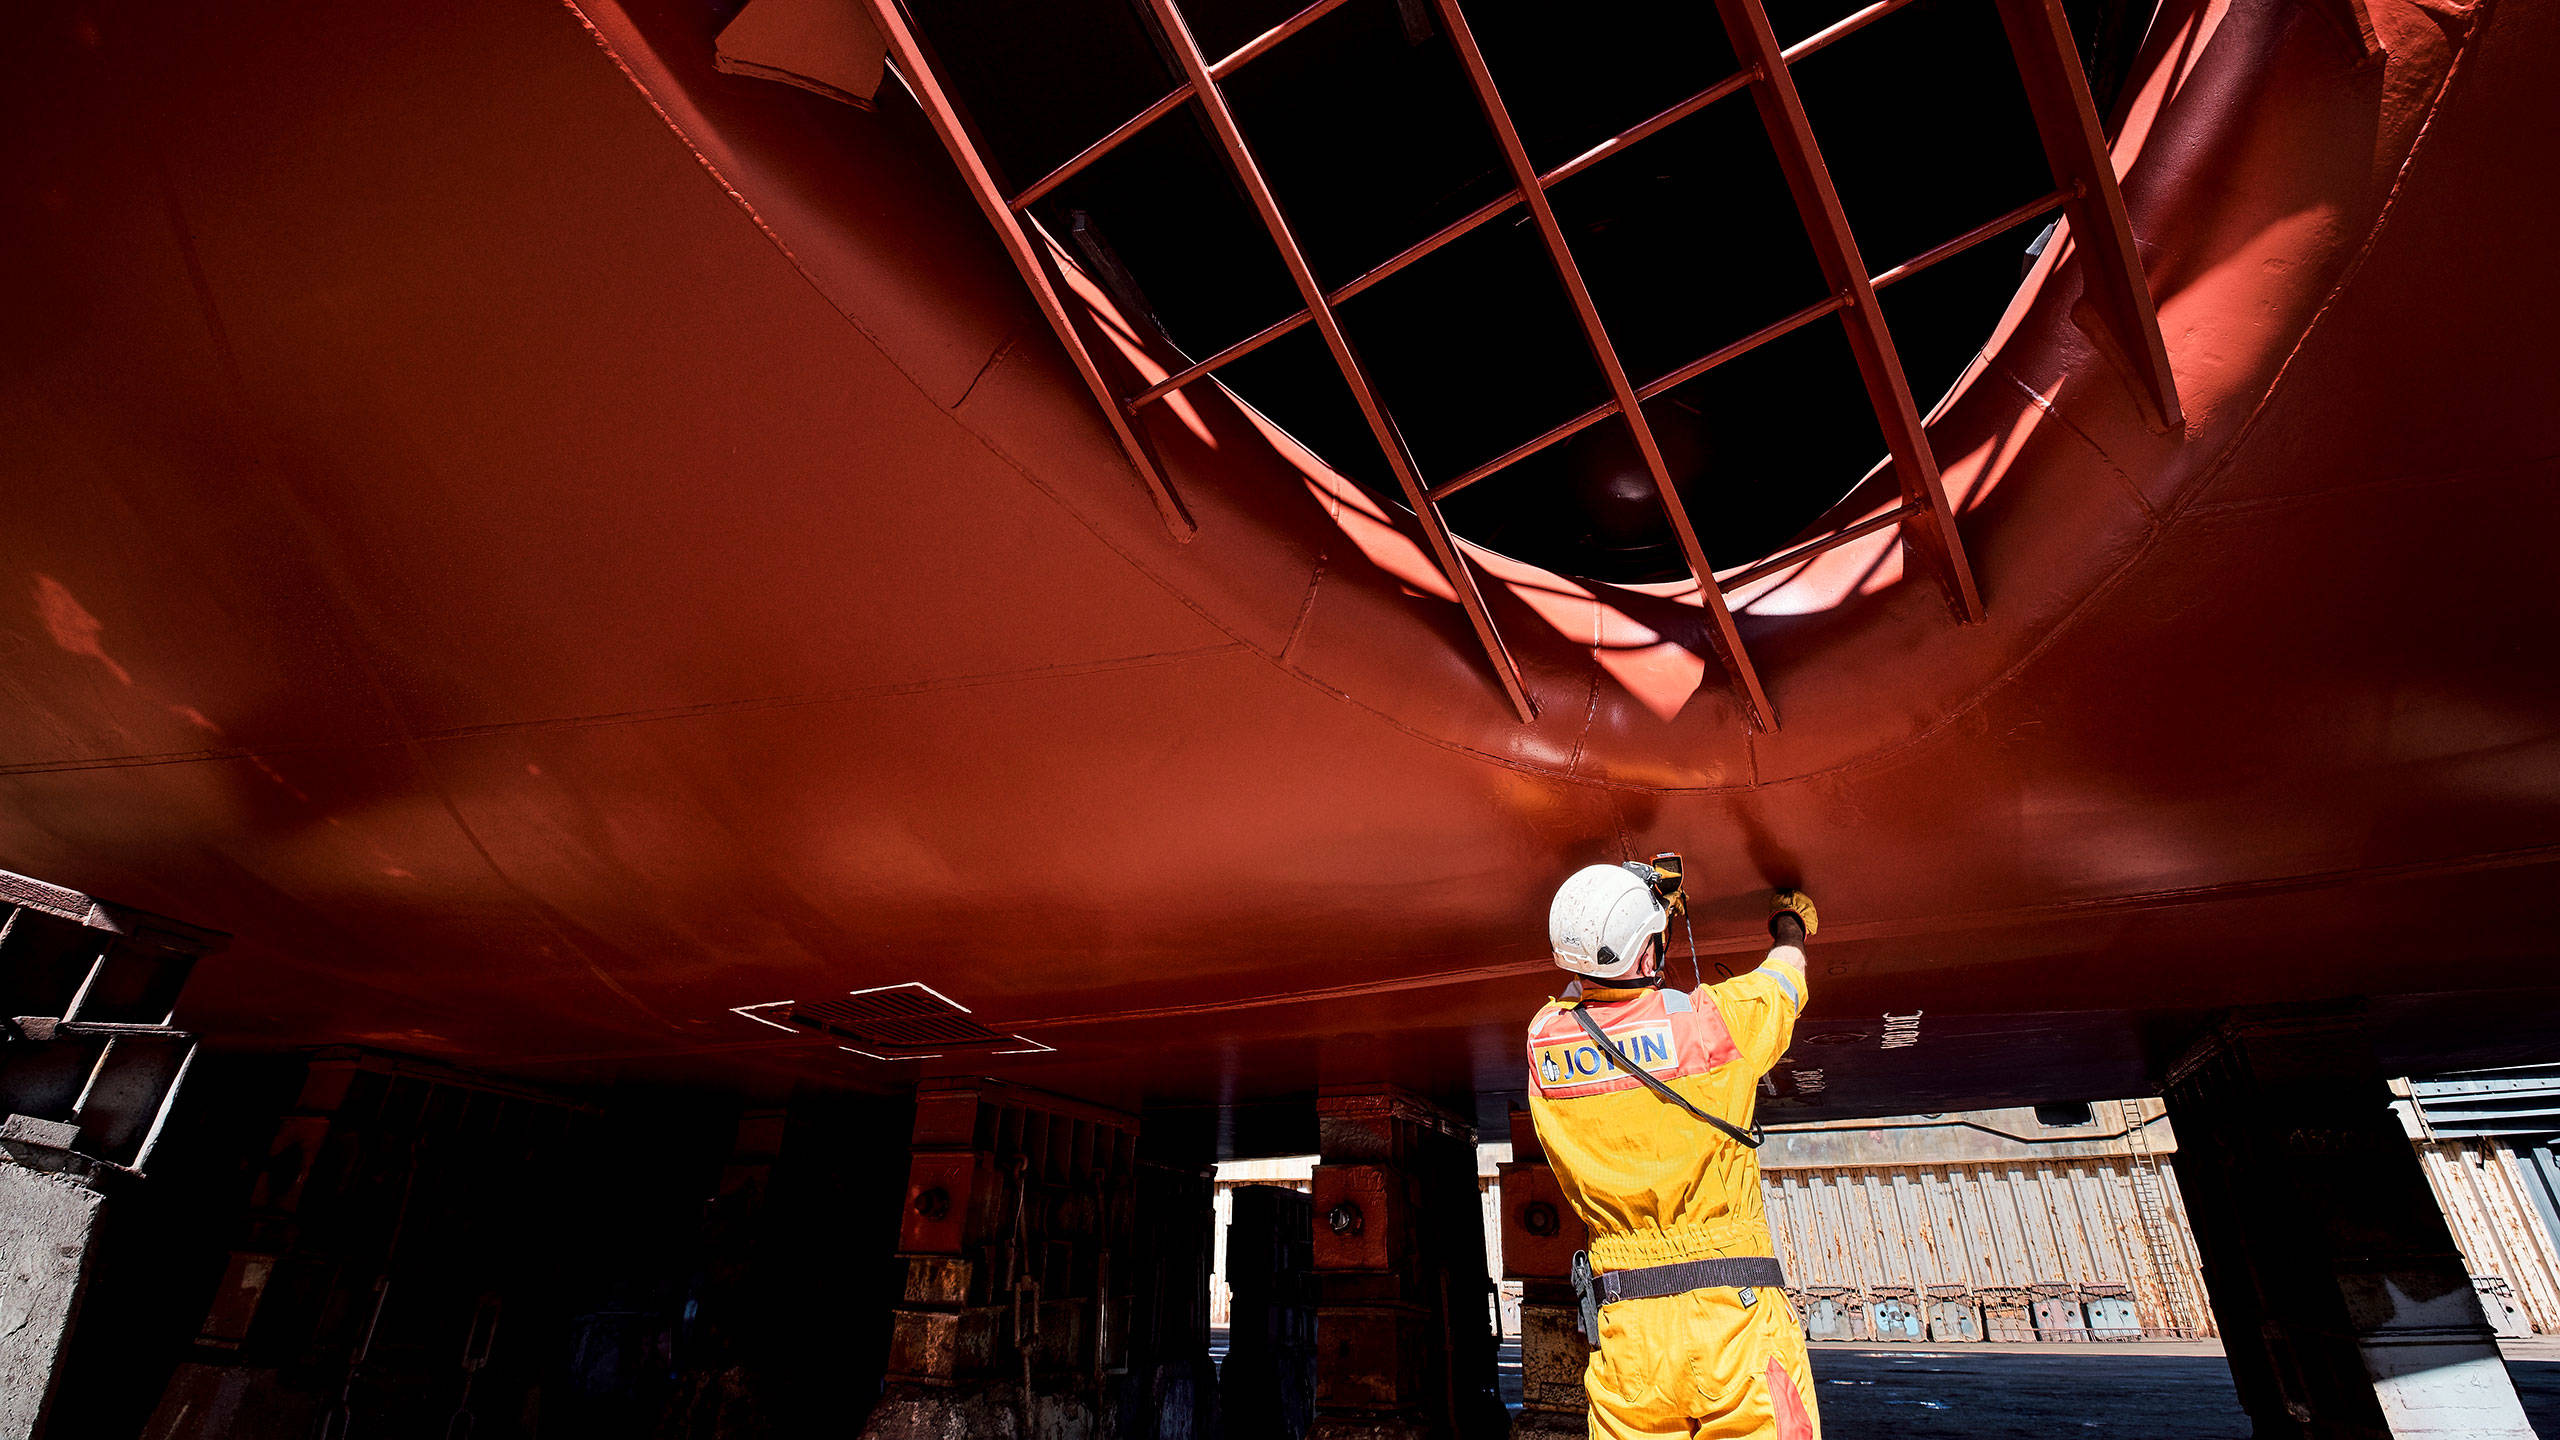 A technical inspector measuring thickness of the coating on a ship hull